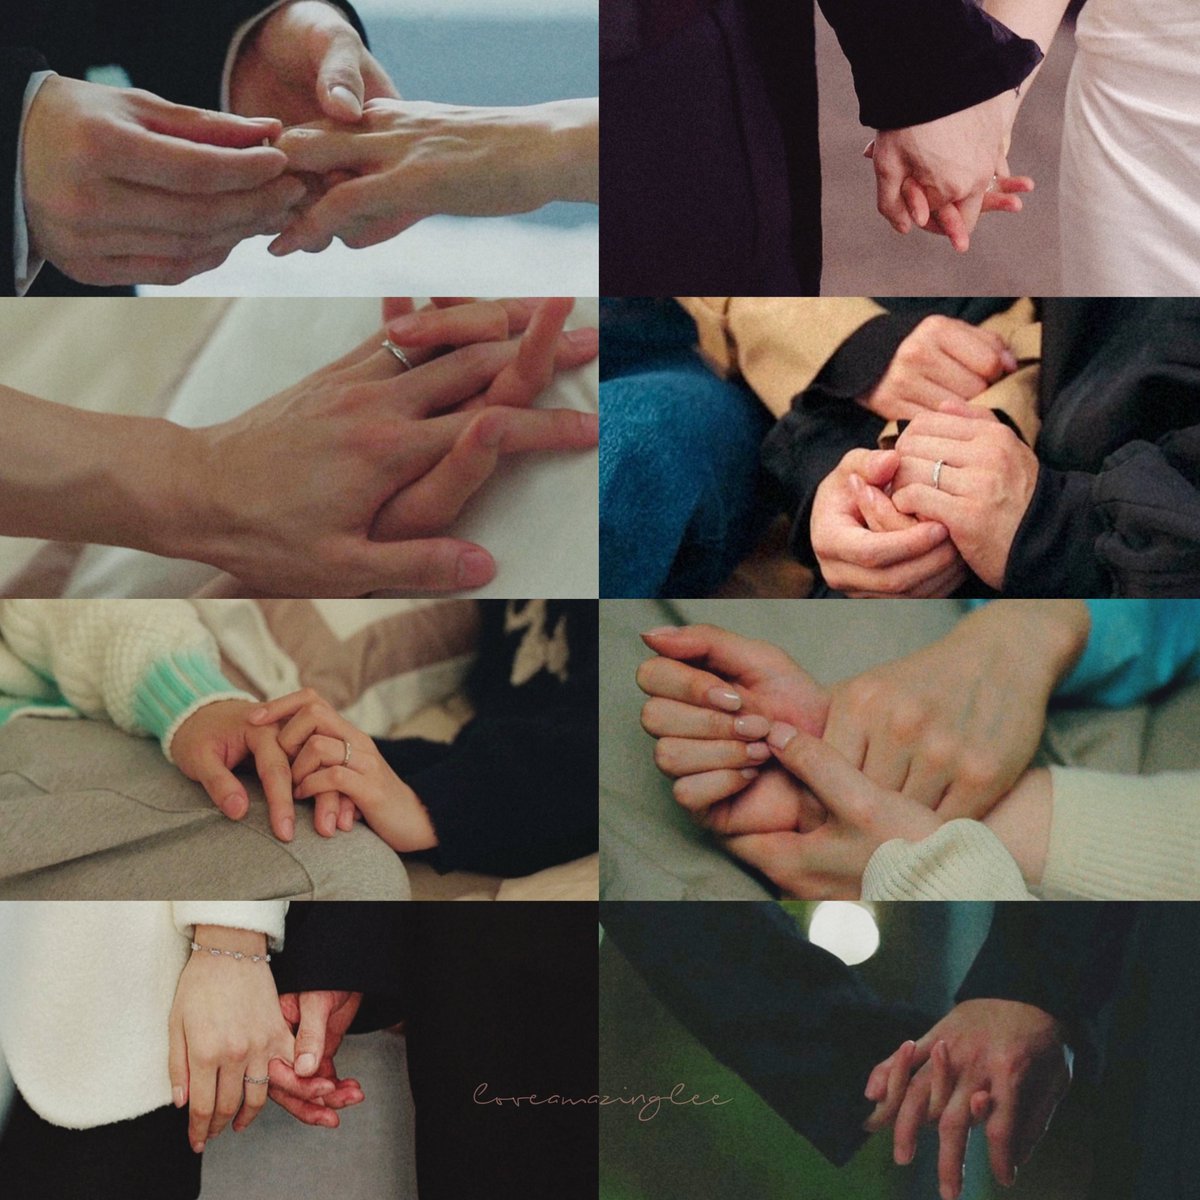 The best hand chemistry goes to
#MyDemon